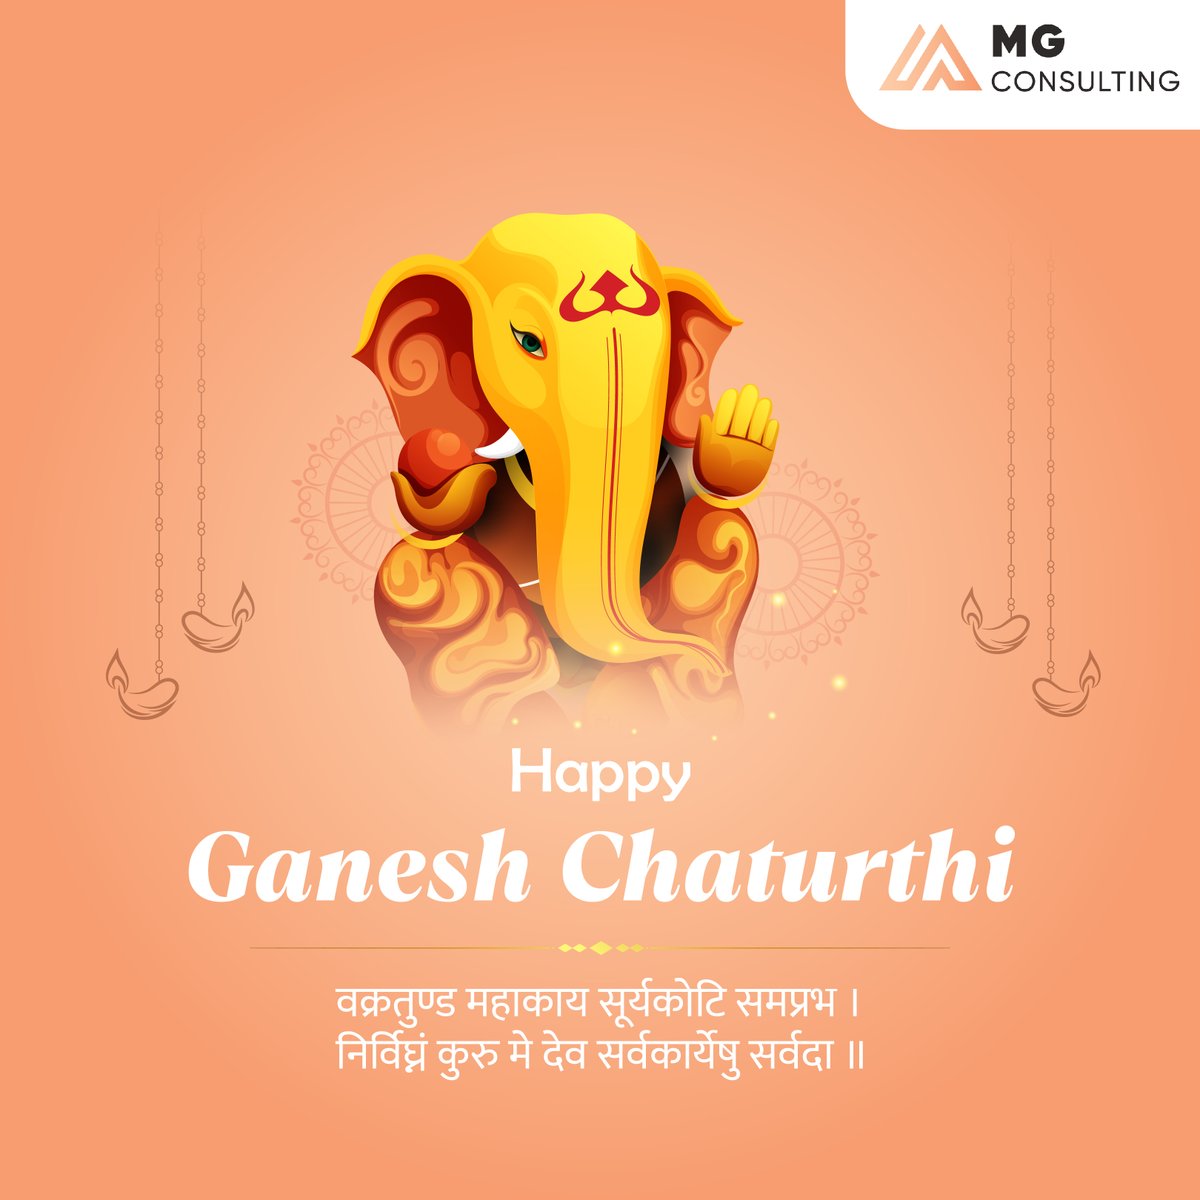 Embracing tradition and innovation at the MG Consulting office this Ganesh Chaturthi
#GaneshChaturthi #OfficeCelebrations #MGConsulting #InnovationAndTradition #FestiveVibes